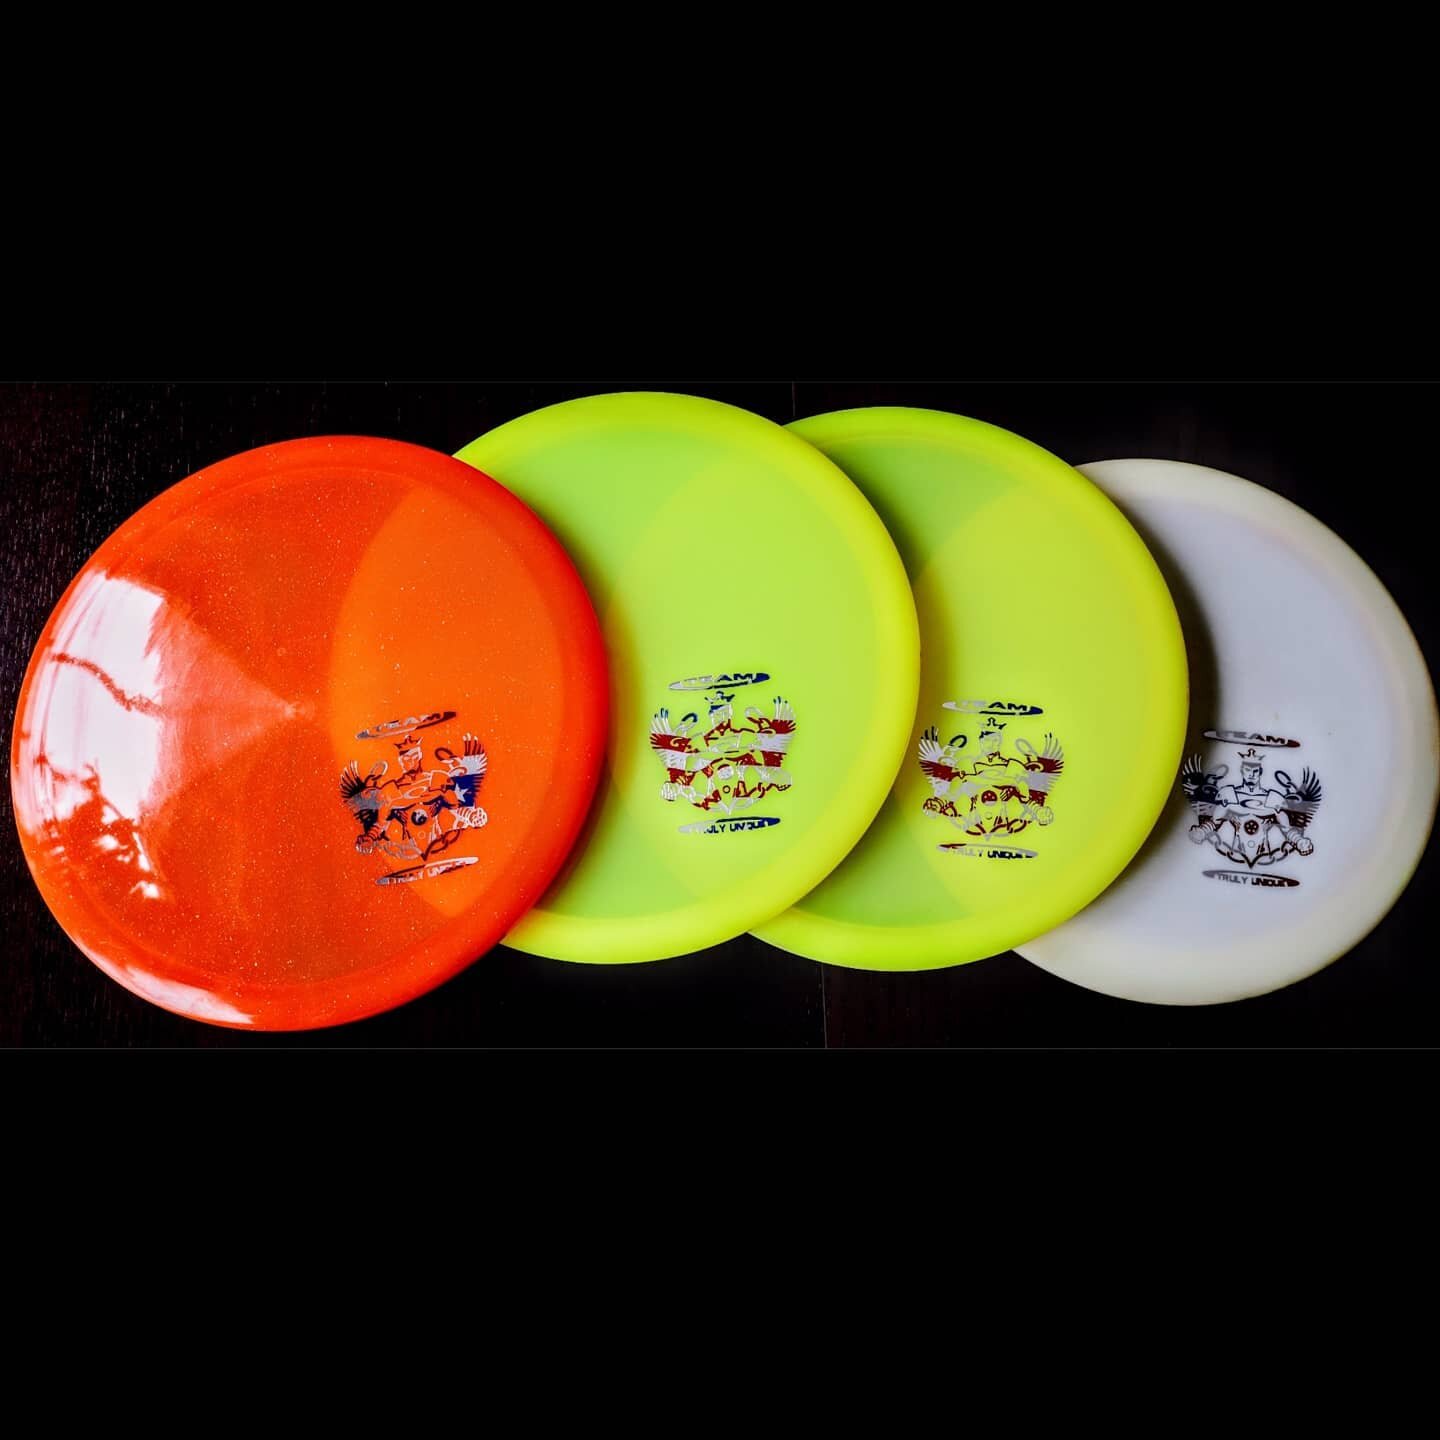 Just got my team discs from @trulyuniquedg !!! 

I can't wait to throw these on the course!

From left to right:
DD Lucid Verdict 
2 DD Lucid EMac Truth's
Lucid convict

Check out Truly Unique's online store for some sweet discs 😉 (link in bio)

#di